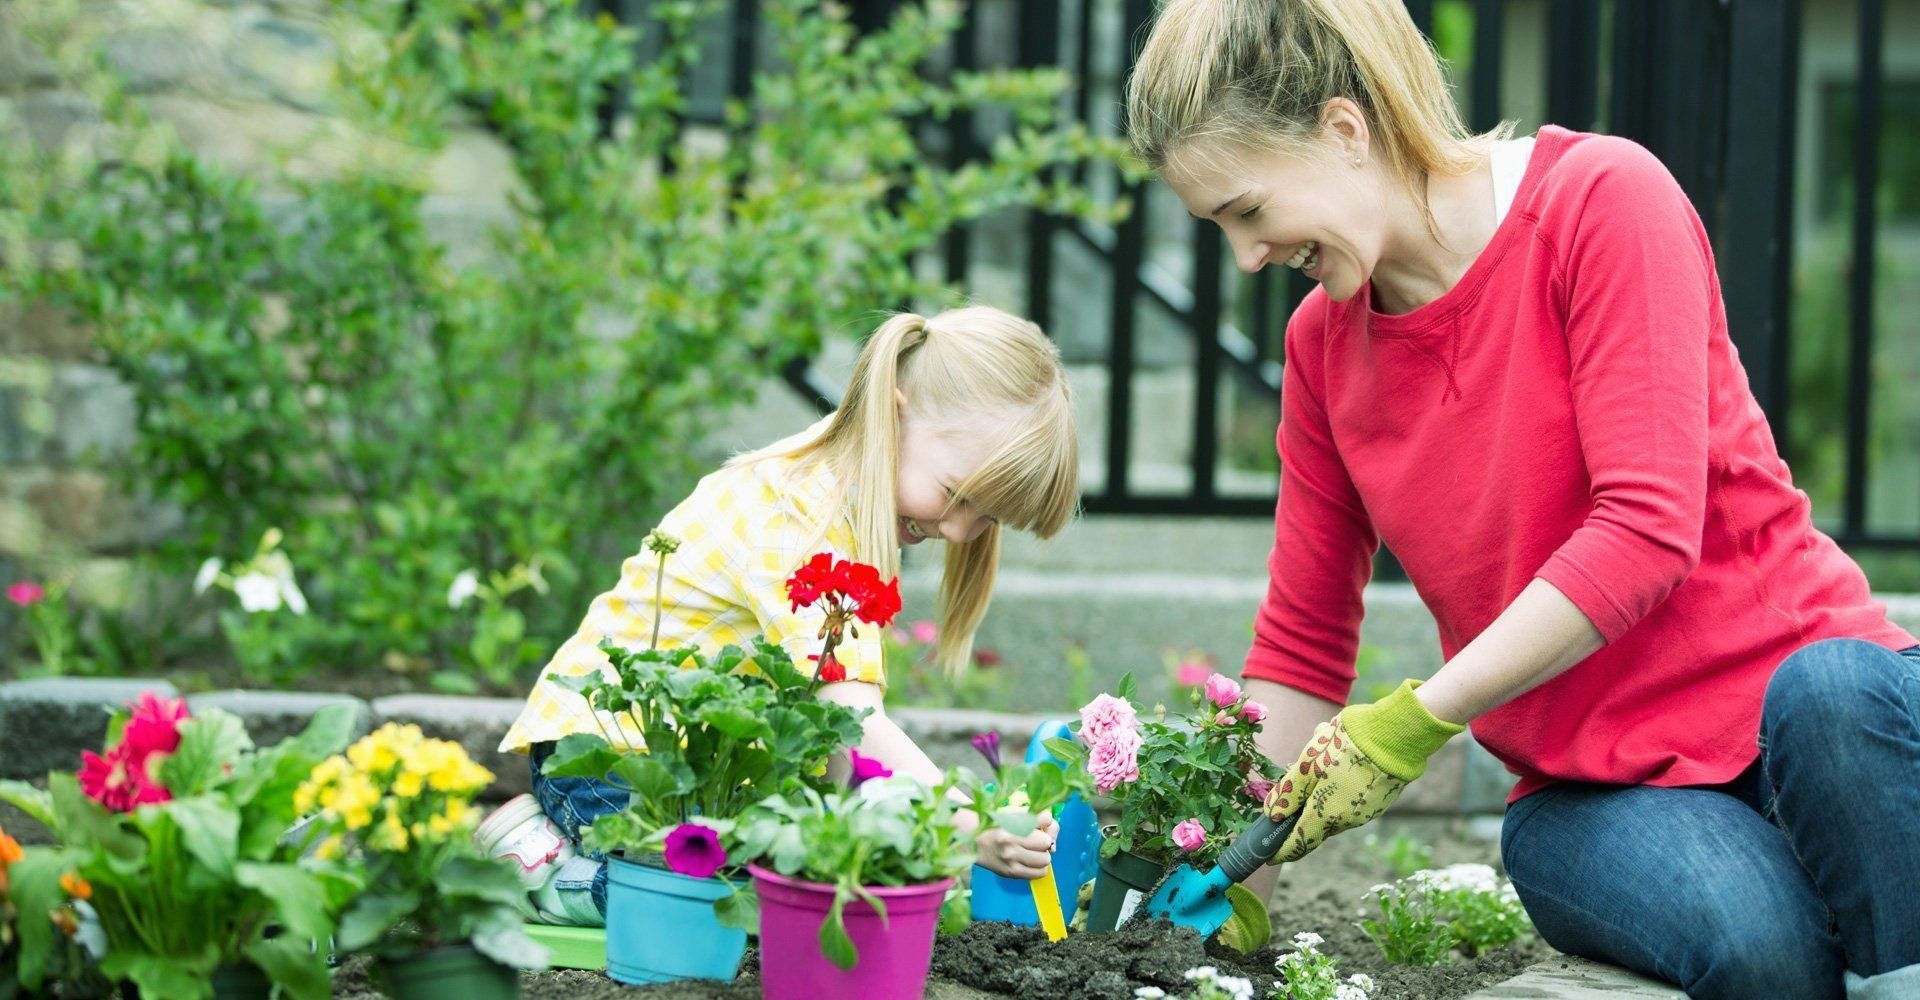 A lady gardening with a kid